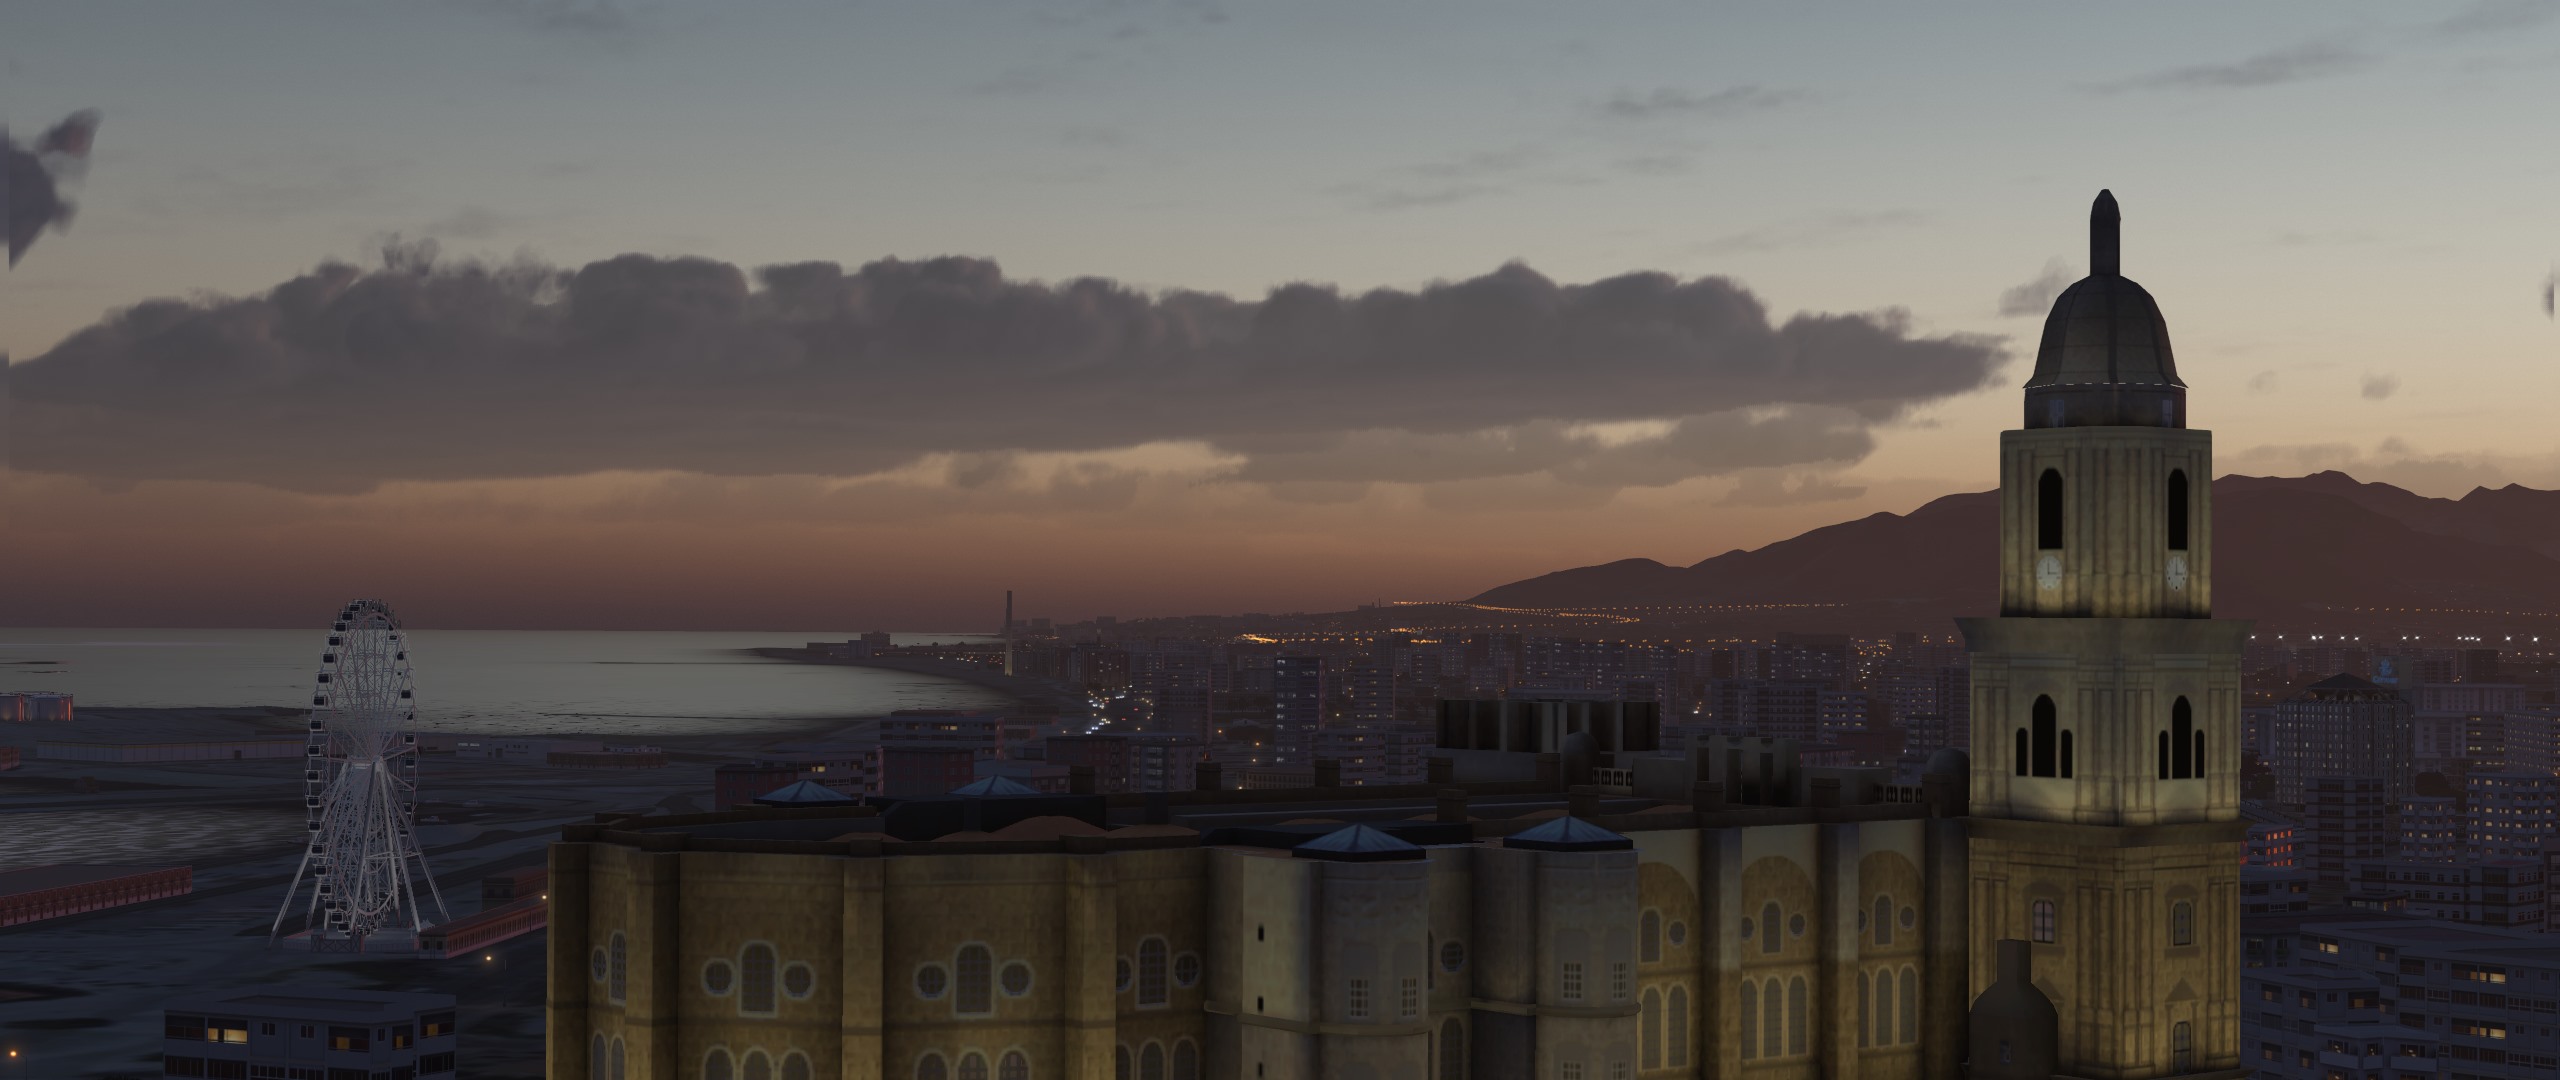 Orbx Teases TrueEarth Southern Spain for X-Plane 11 - IniBuilds, X-Plane, Xometry